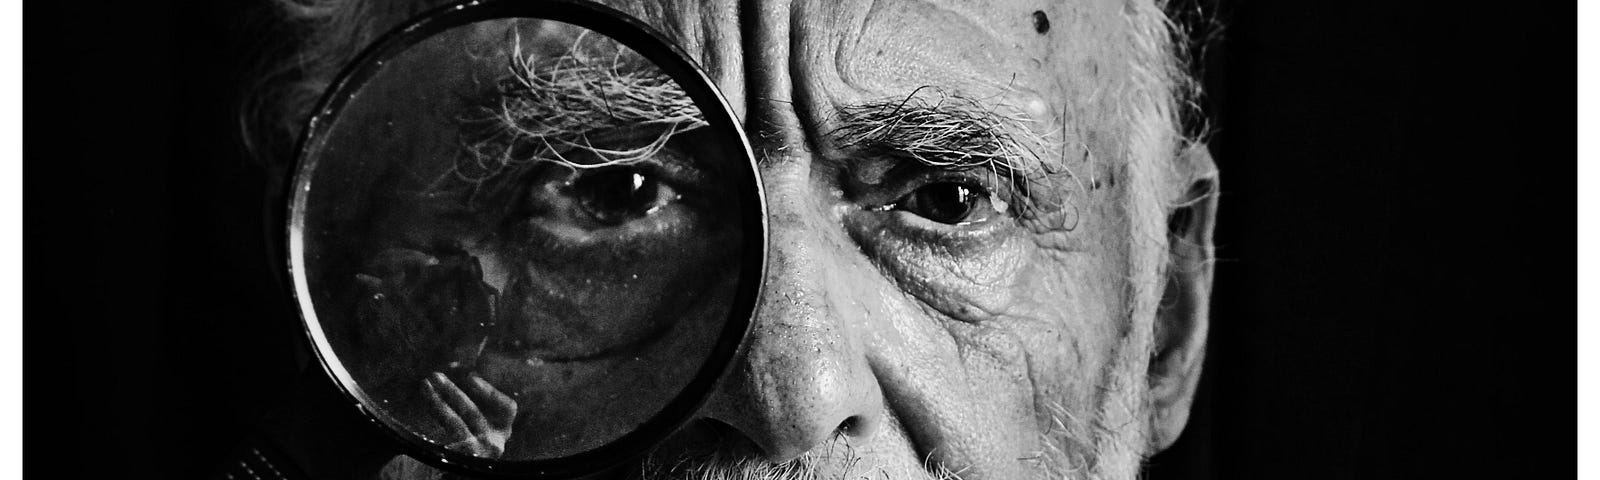 Black and white photograph of an old man looking towards the camera through a magnifying glass